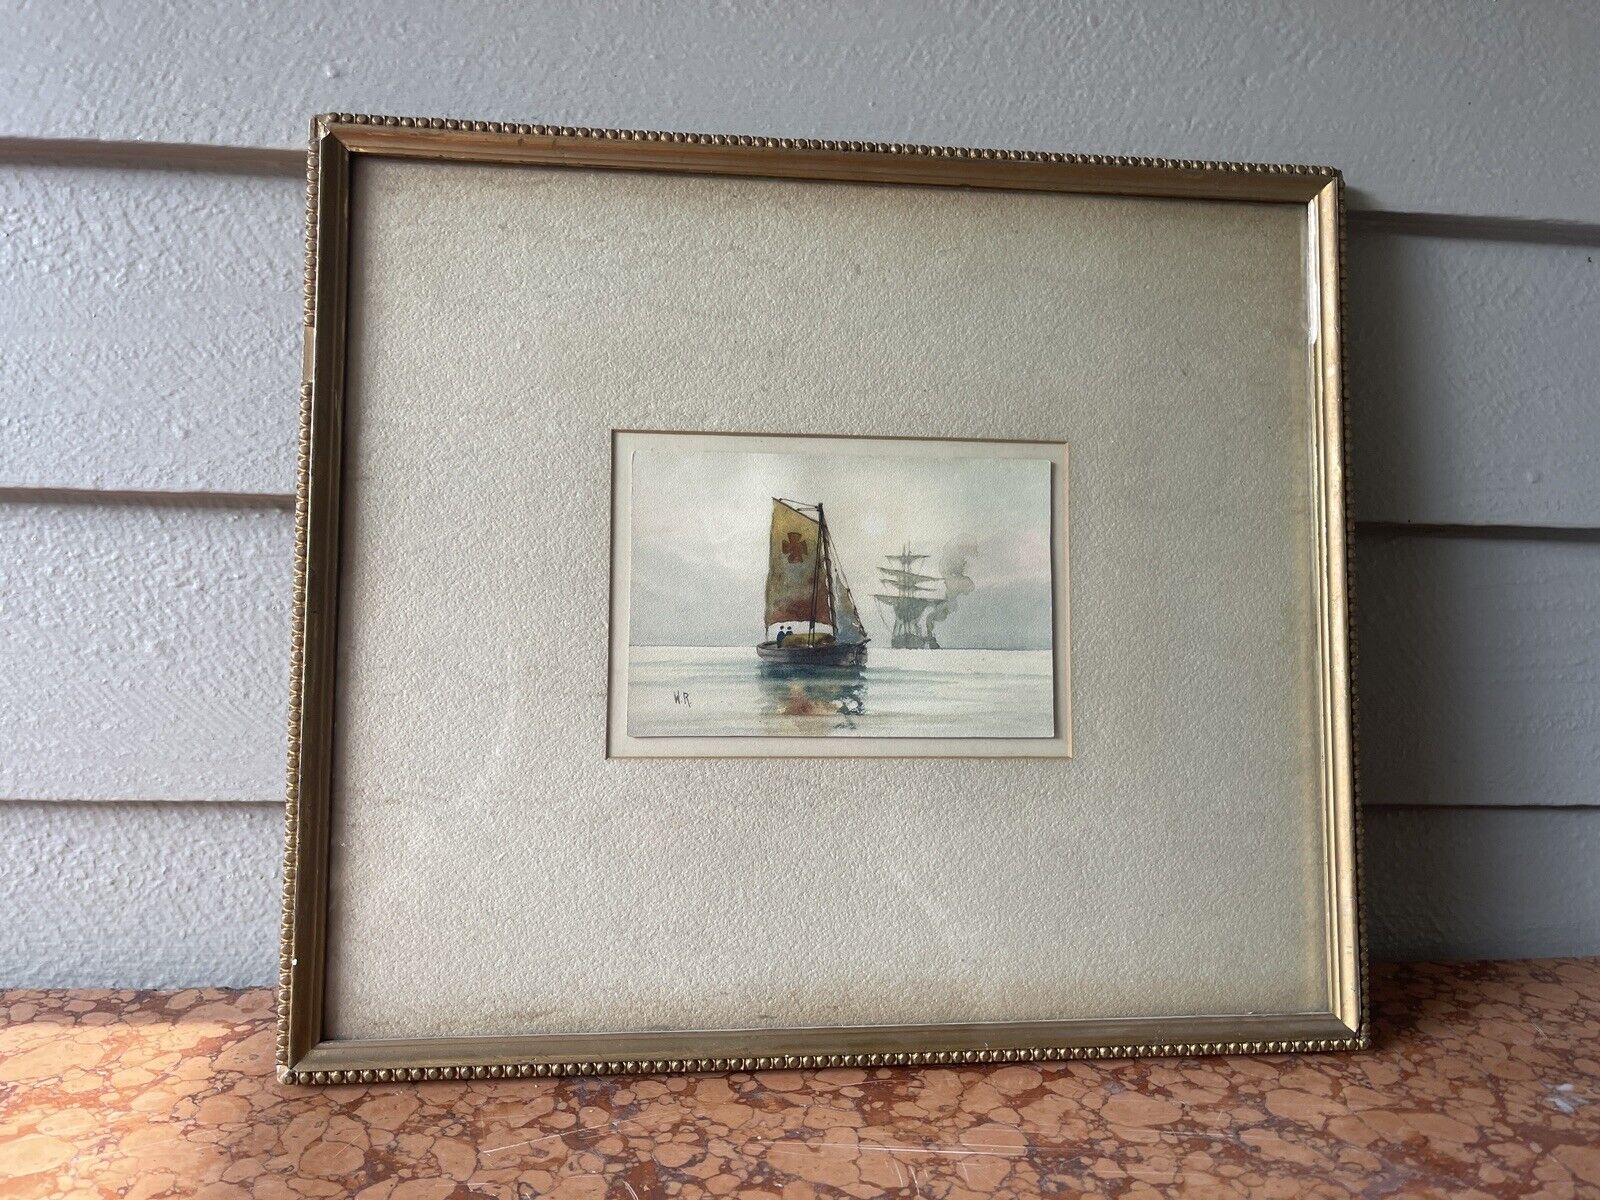 ANTIQUE WATERCOLOR SIGNED WR SAILING 19TH C SCENE TWO SAILBOATS ONE IN DISTRESS?